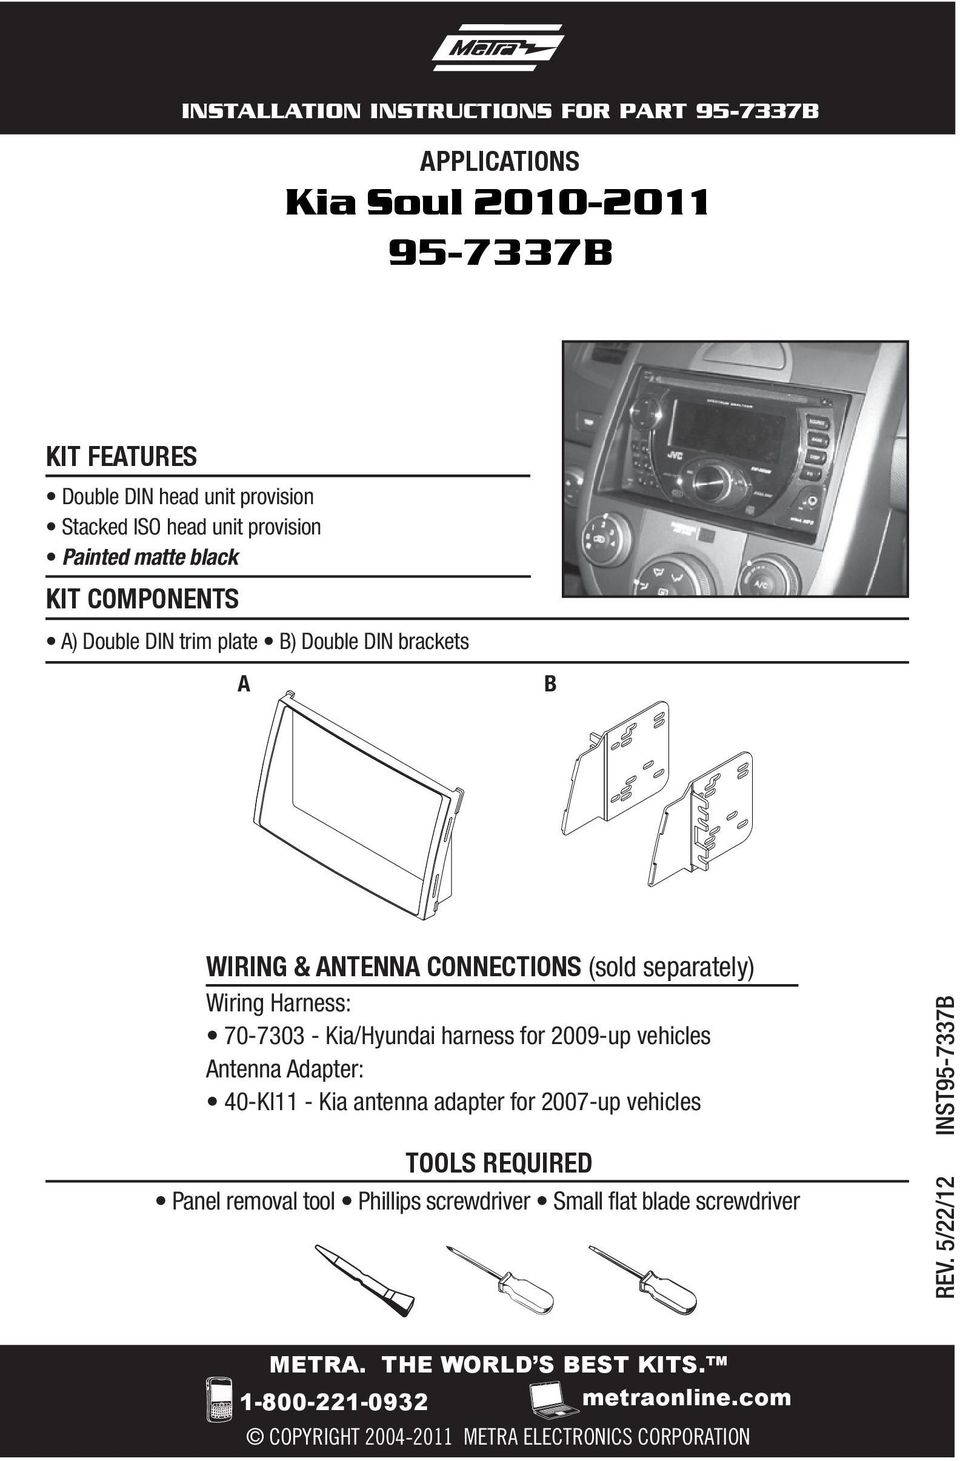 Kia/Hyundai harness for 2009-up vehicles Antenna Adapter: 40-KI11 - Kia antenna adapter for 2007-up vehicles TOOLS REQUIRED Panel removal tool Phillips